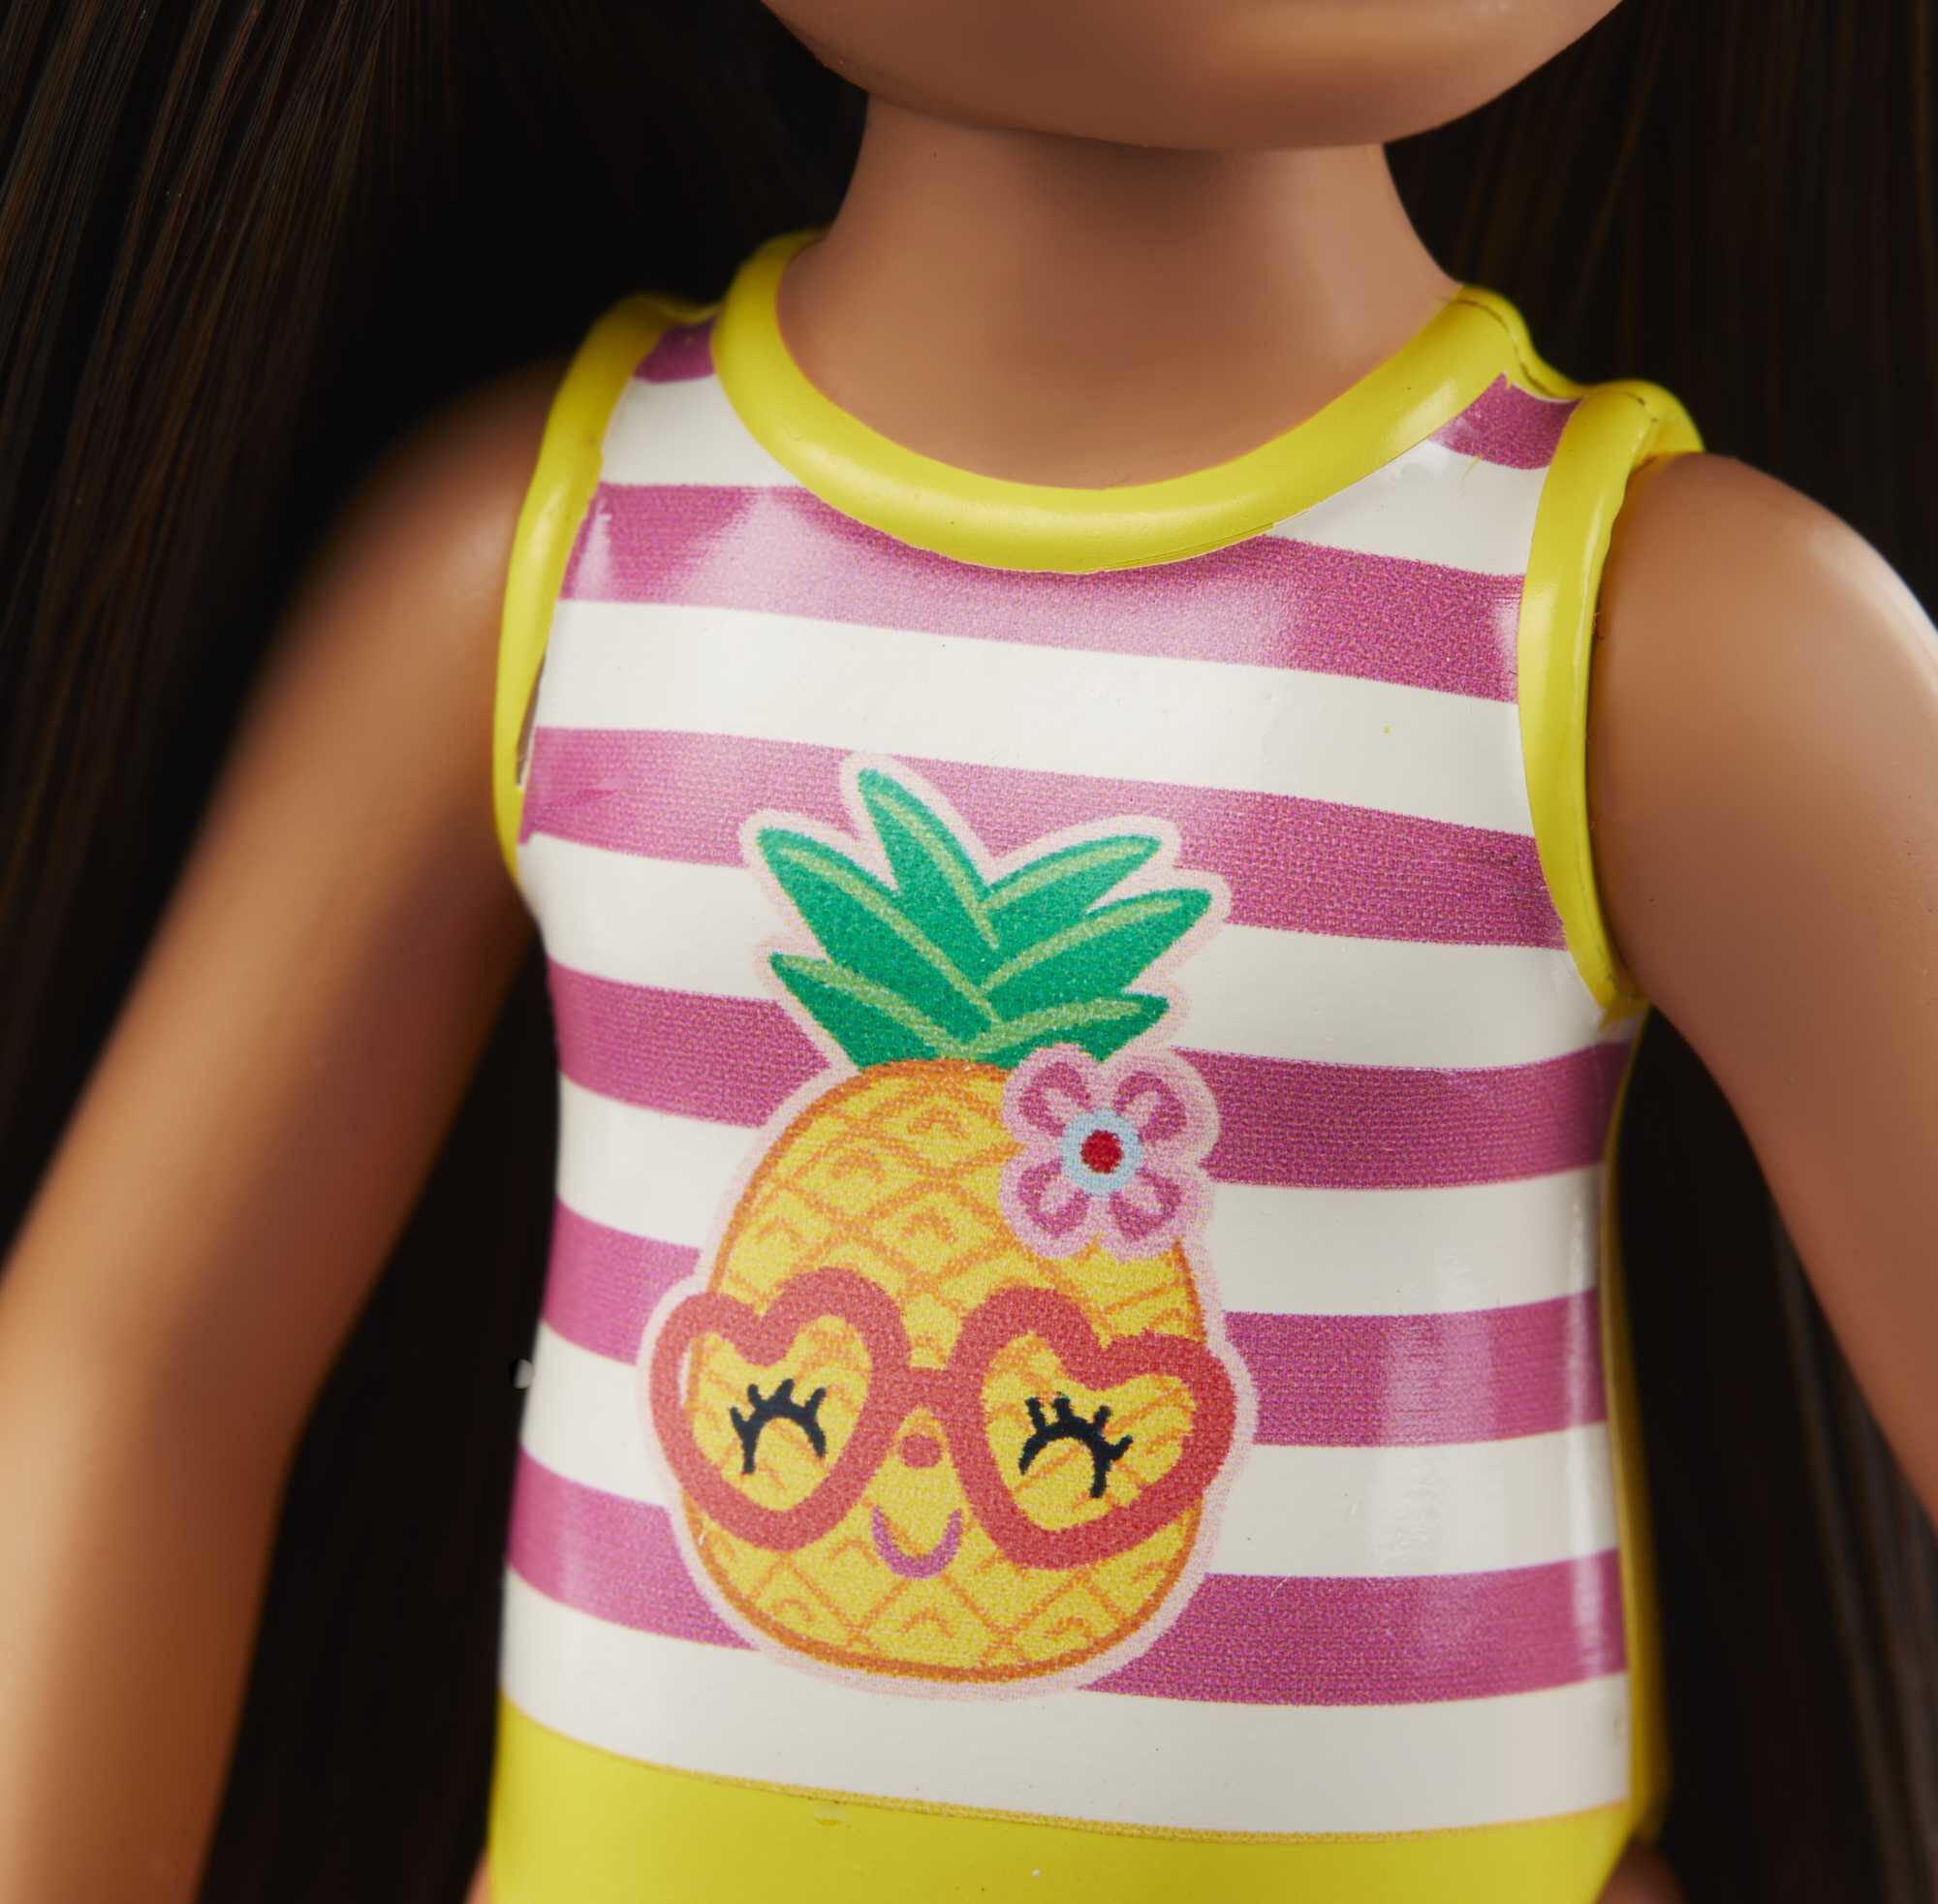 Barbie Club Chelsea Doll, Small Doll with Long Brown Hair, Green Eyes & Pineapple-Graphic Swimsuit - image 3 of 5